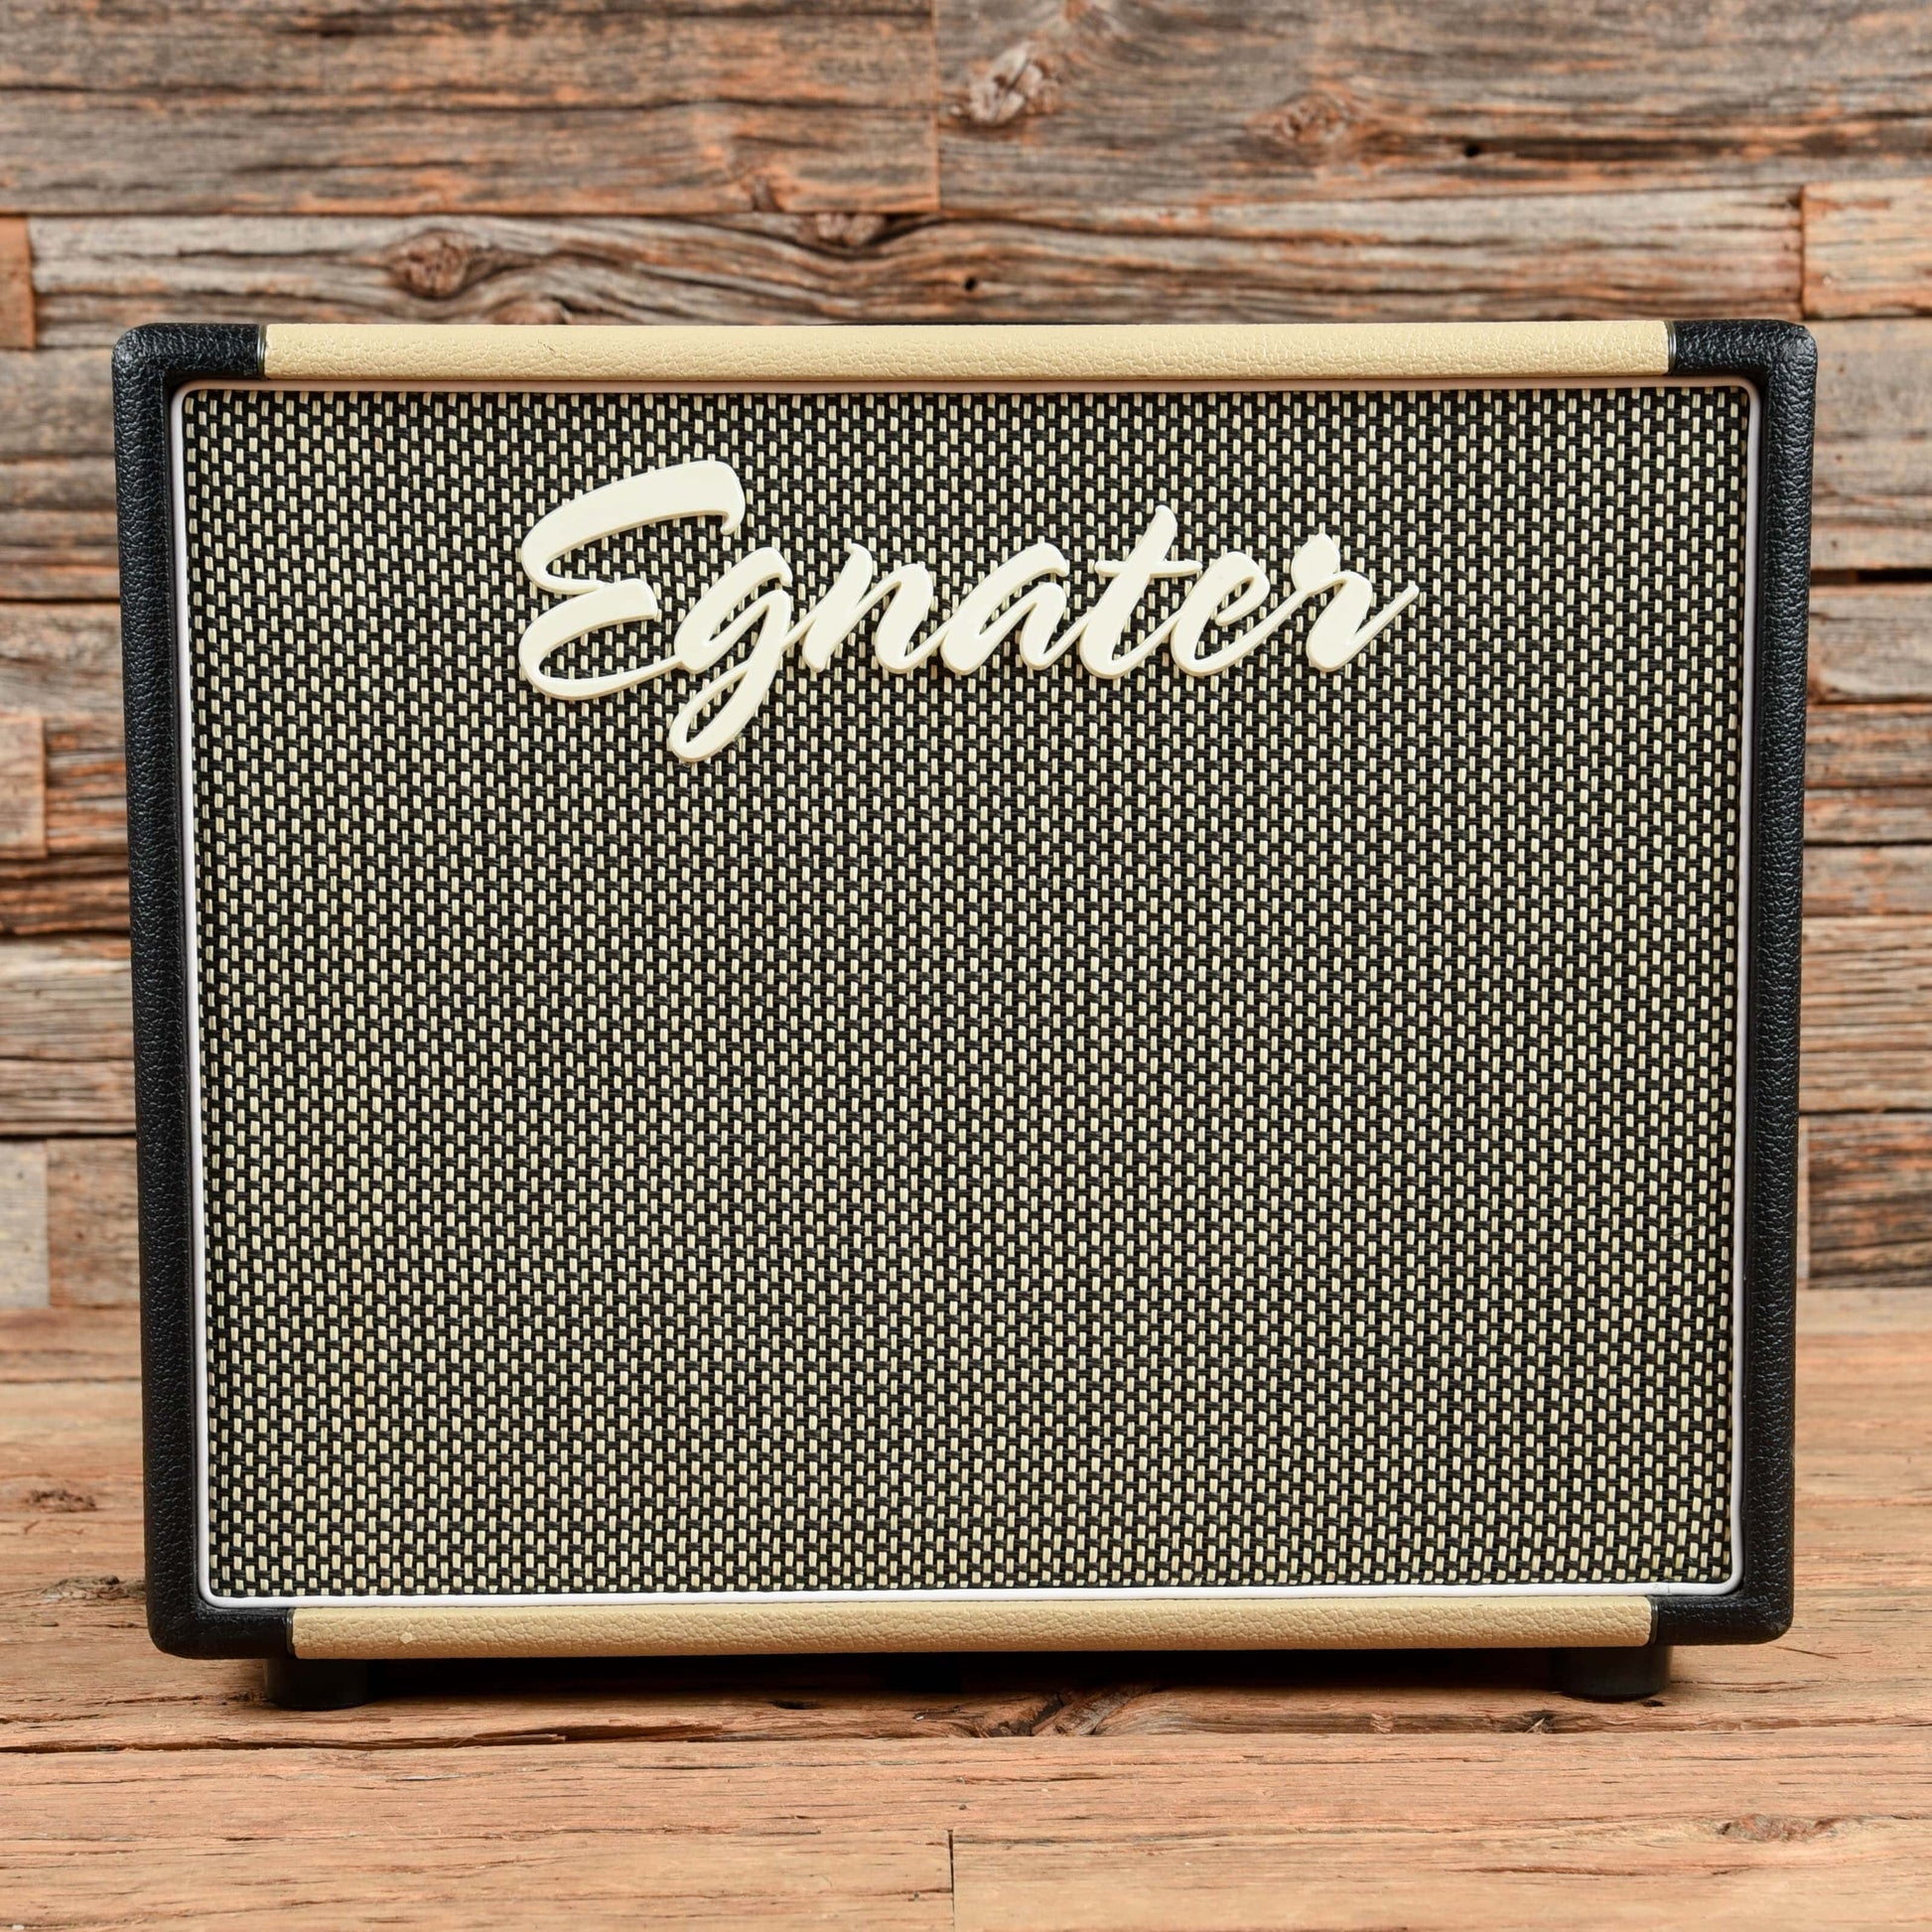 Egnater Rebel 112X 1x12 Extension Cab Amps / Guitar Cabinets